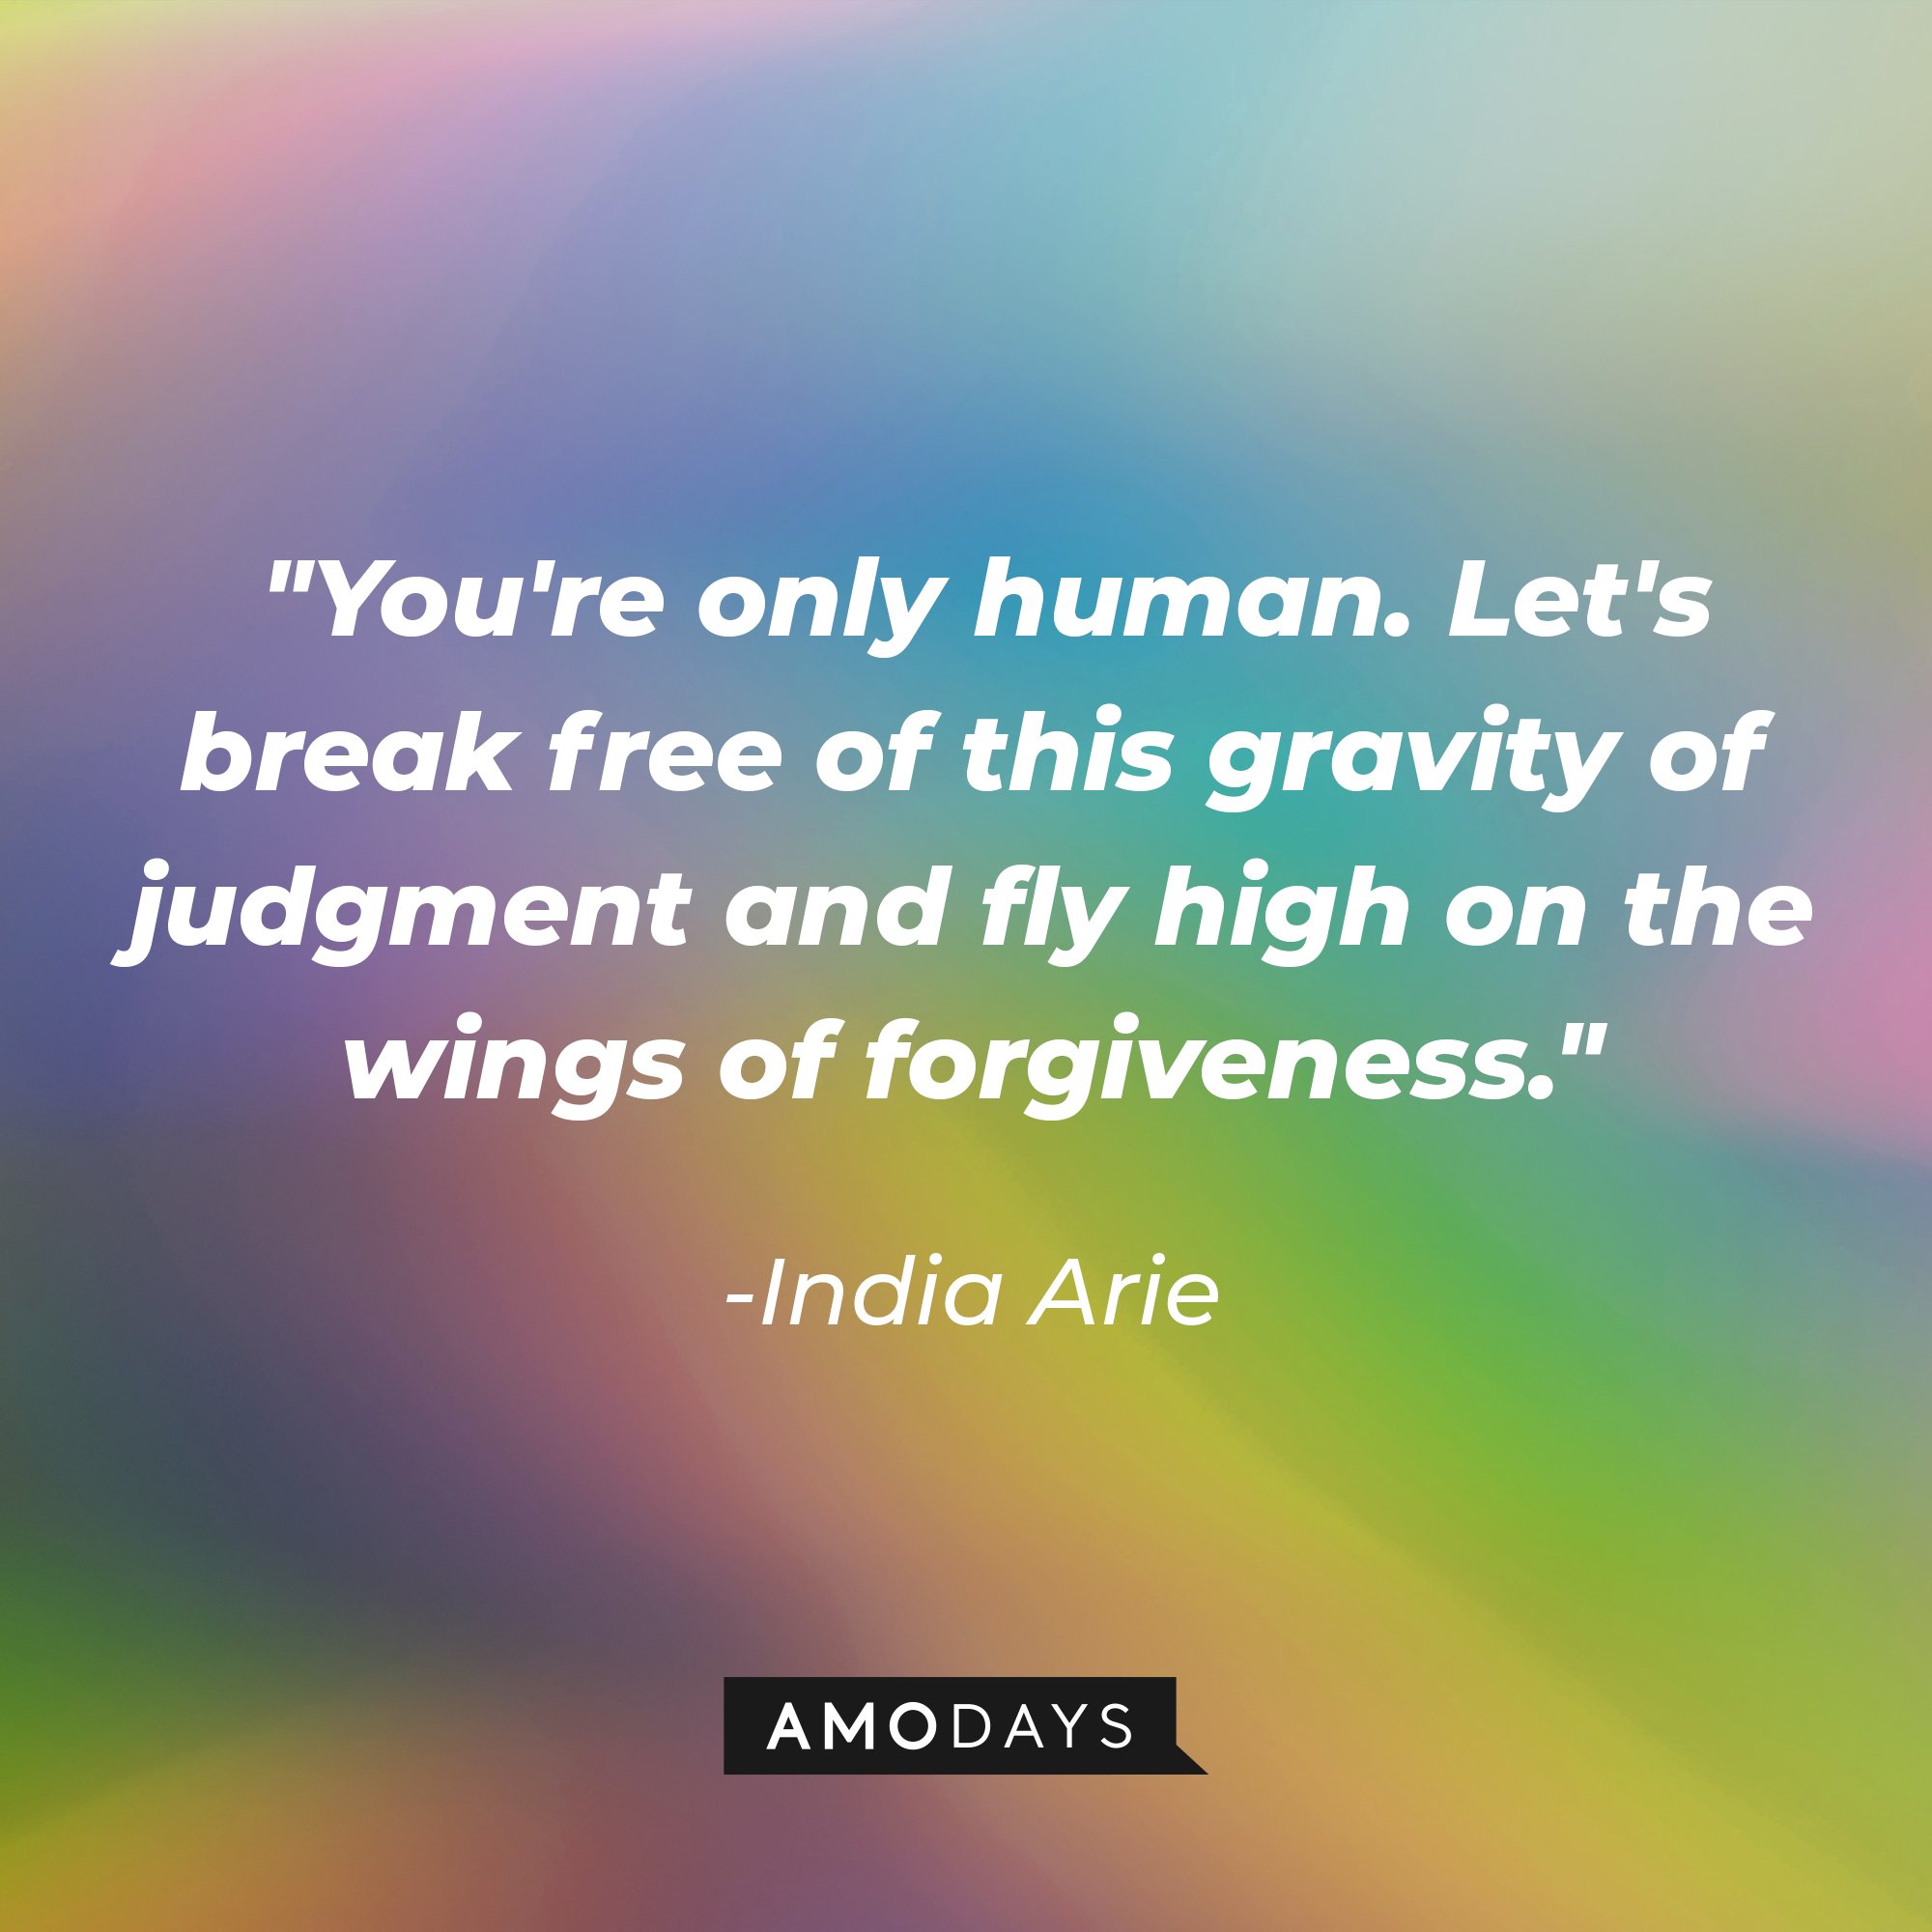 India Arie’s quote: "You're only human. Let's break free of this gravity of judgment and fly high on the wings of forgiveness." | Image: AmoDays